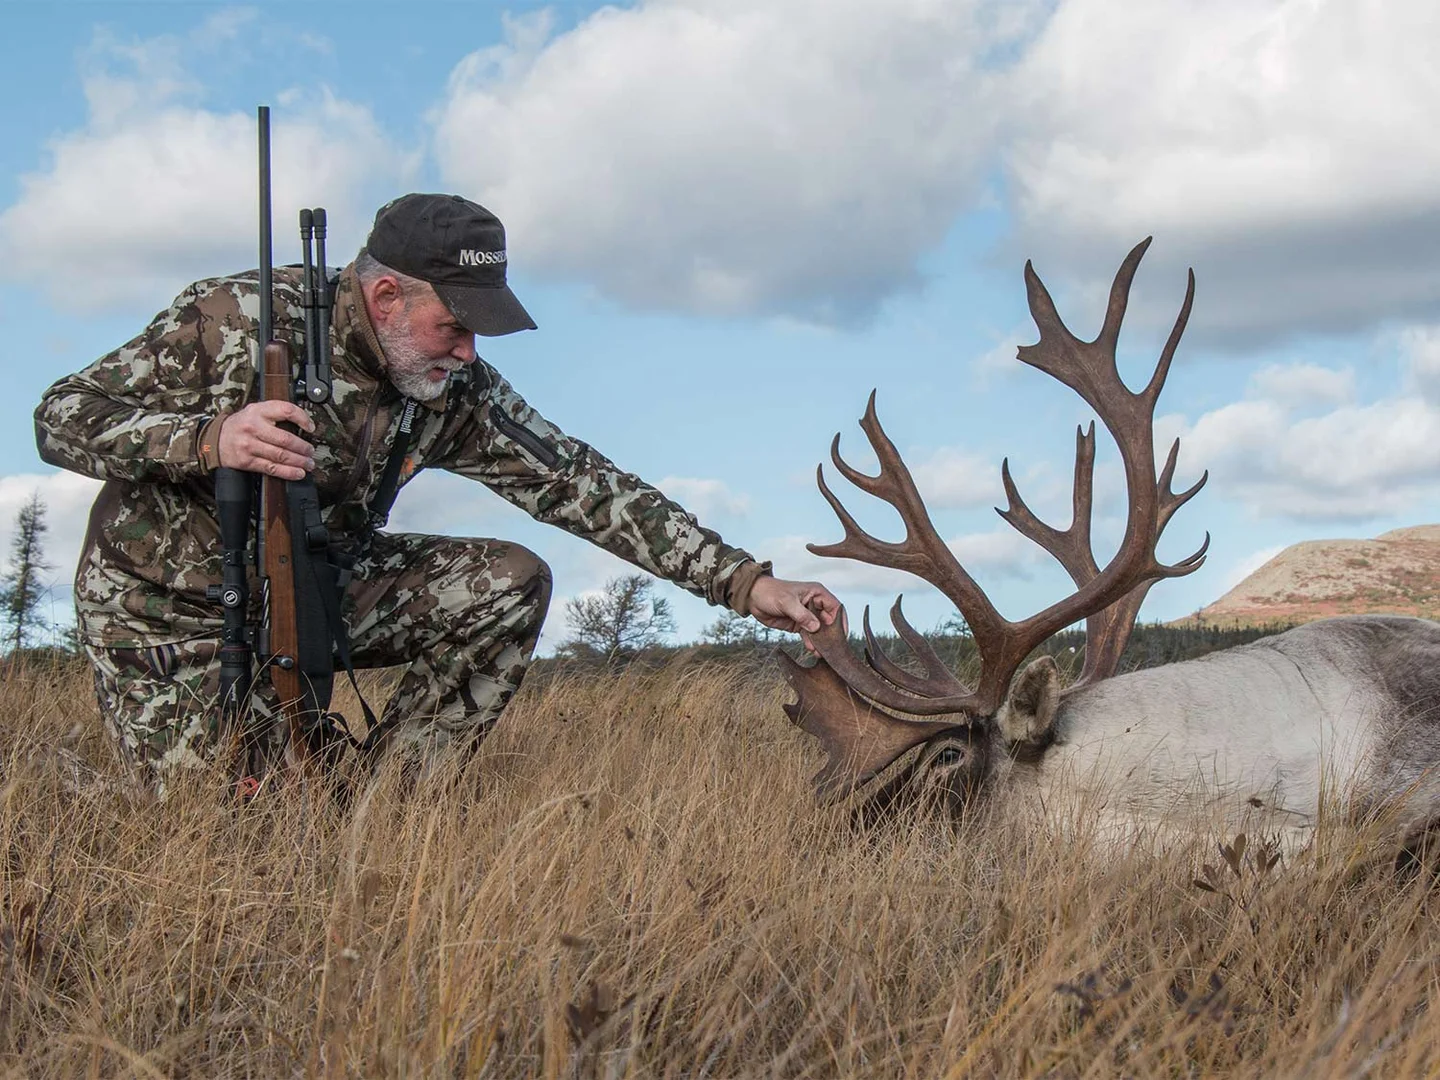 Why is the 6.5 Creedmoor good for hunting?